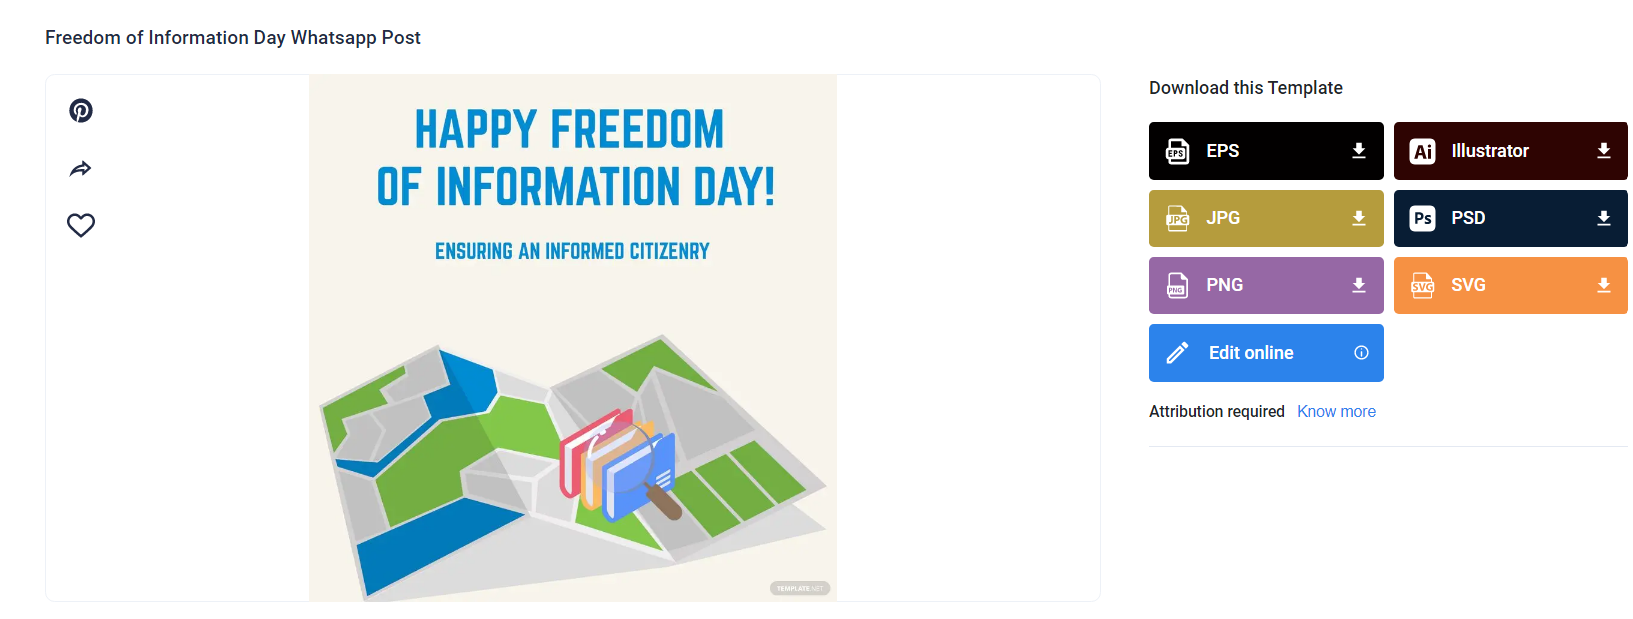 grab a freedom of information day whatsapp post template